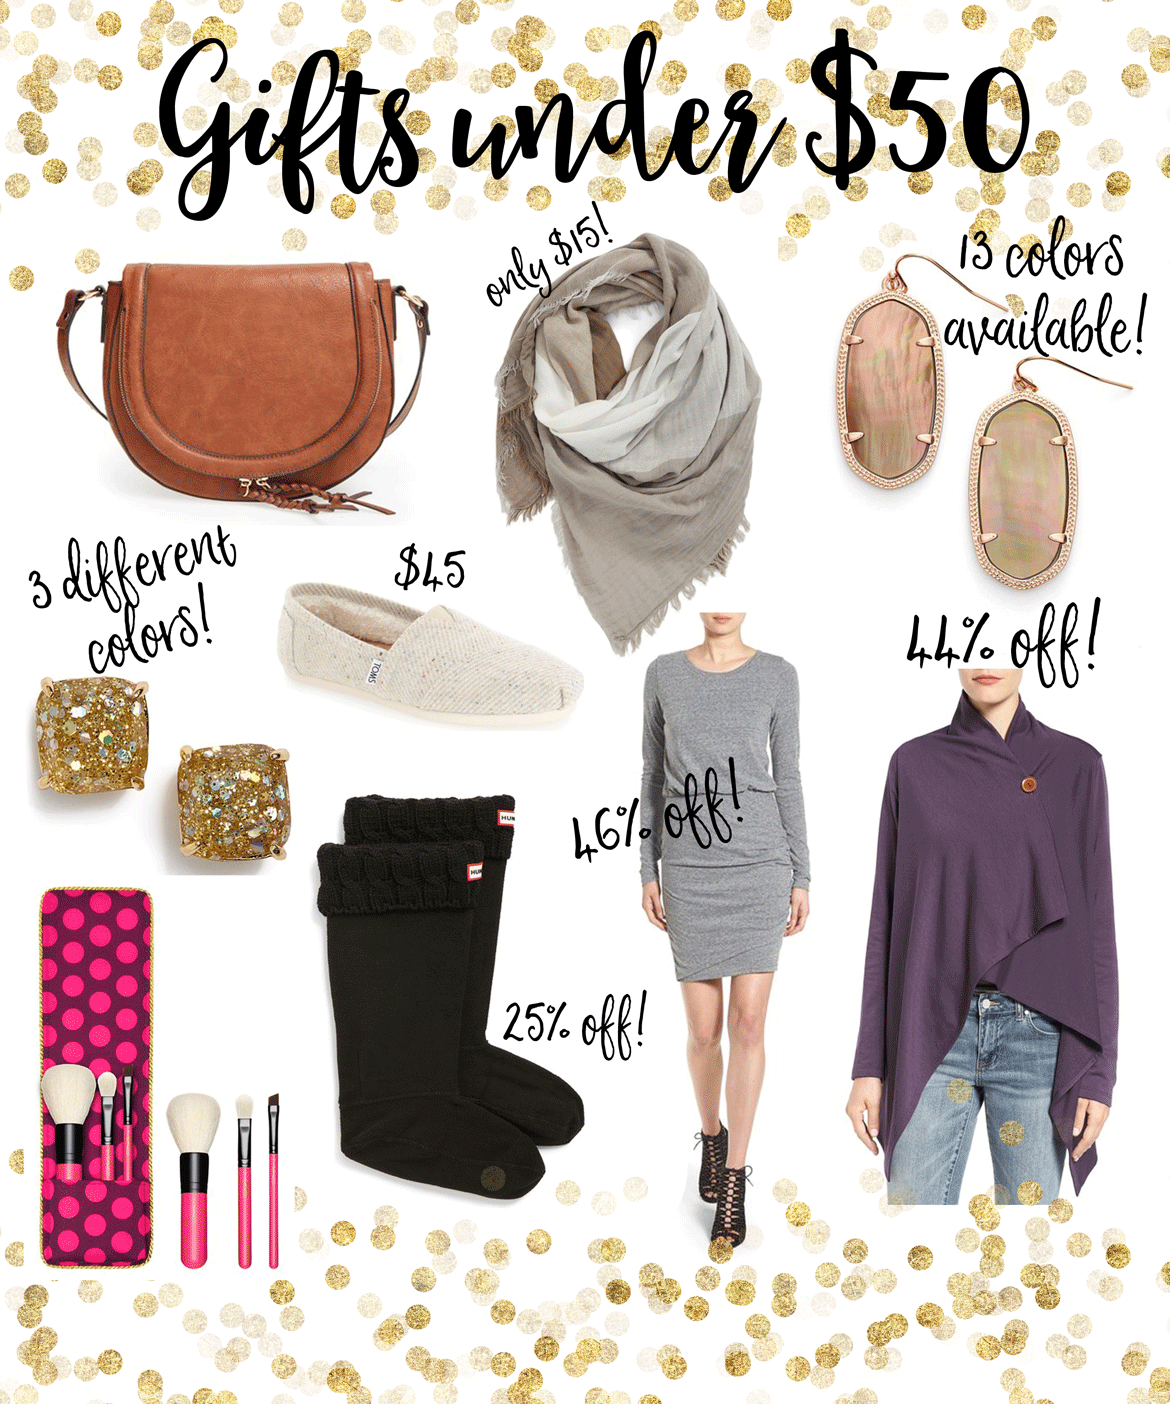 gifts under $50 cyber monday deals sale || Fashion styles for women || angela lanter hello gorgeous